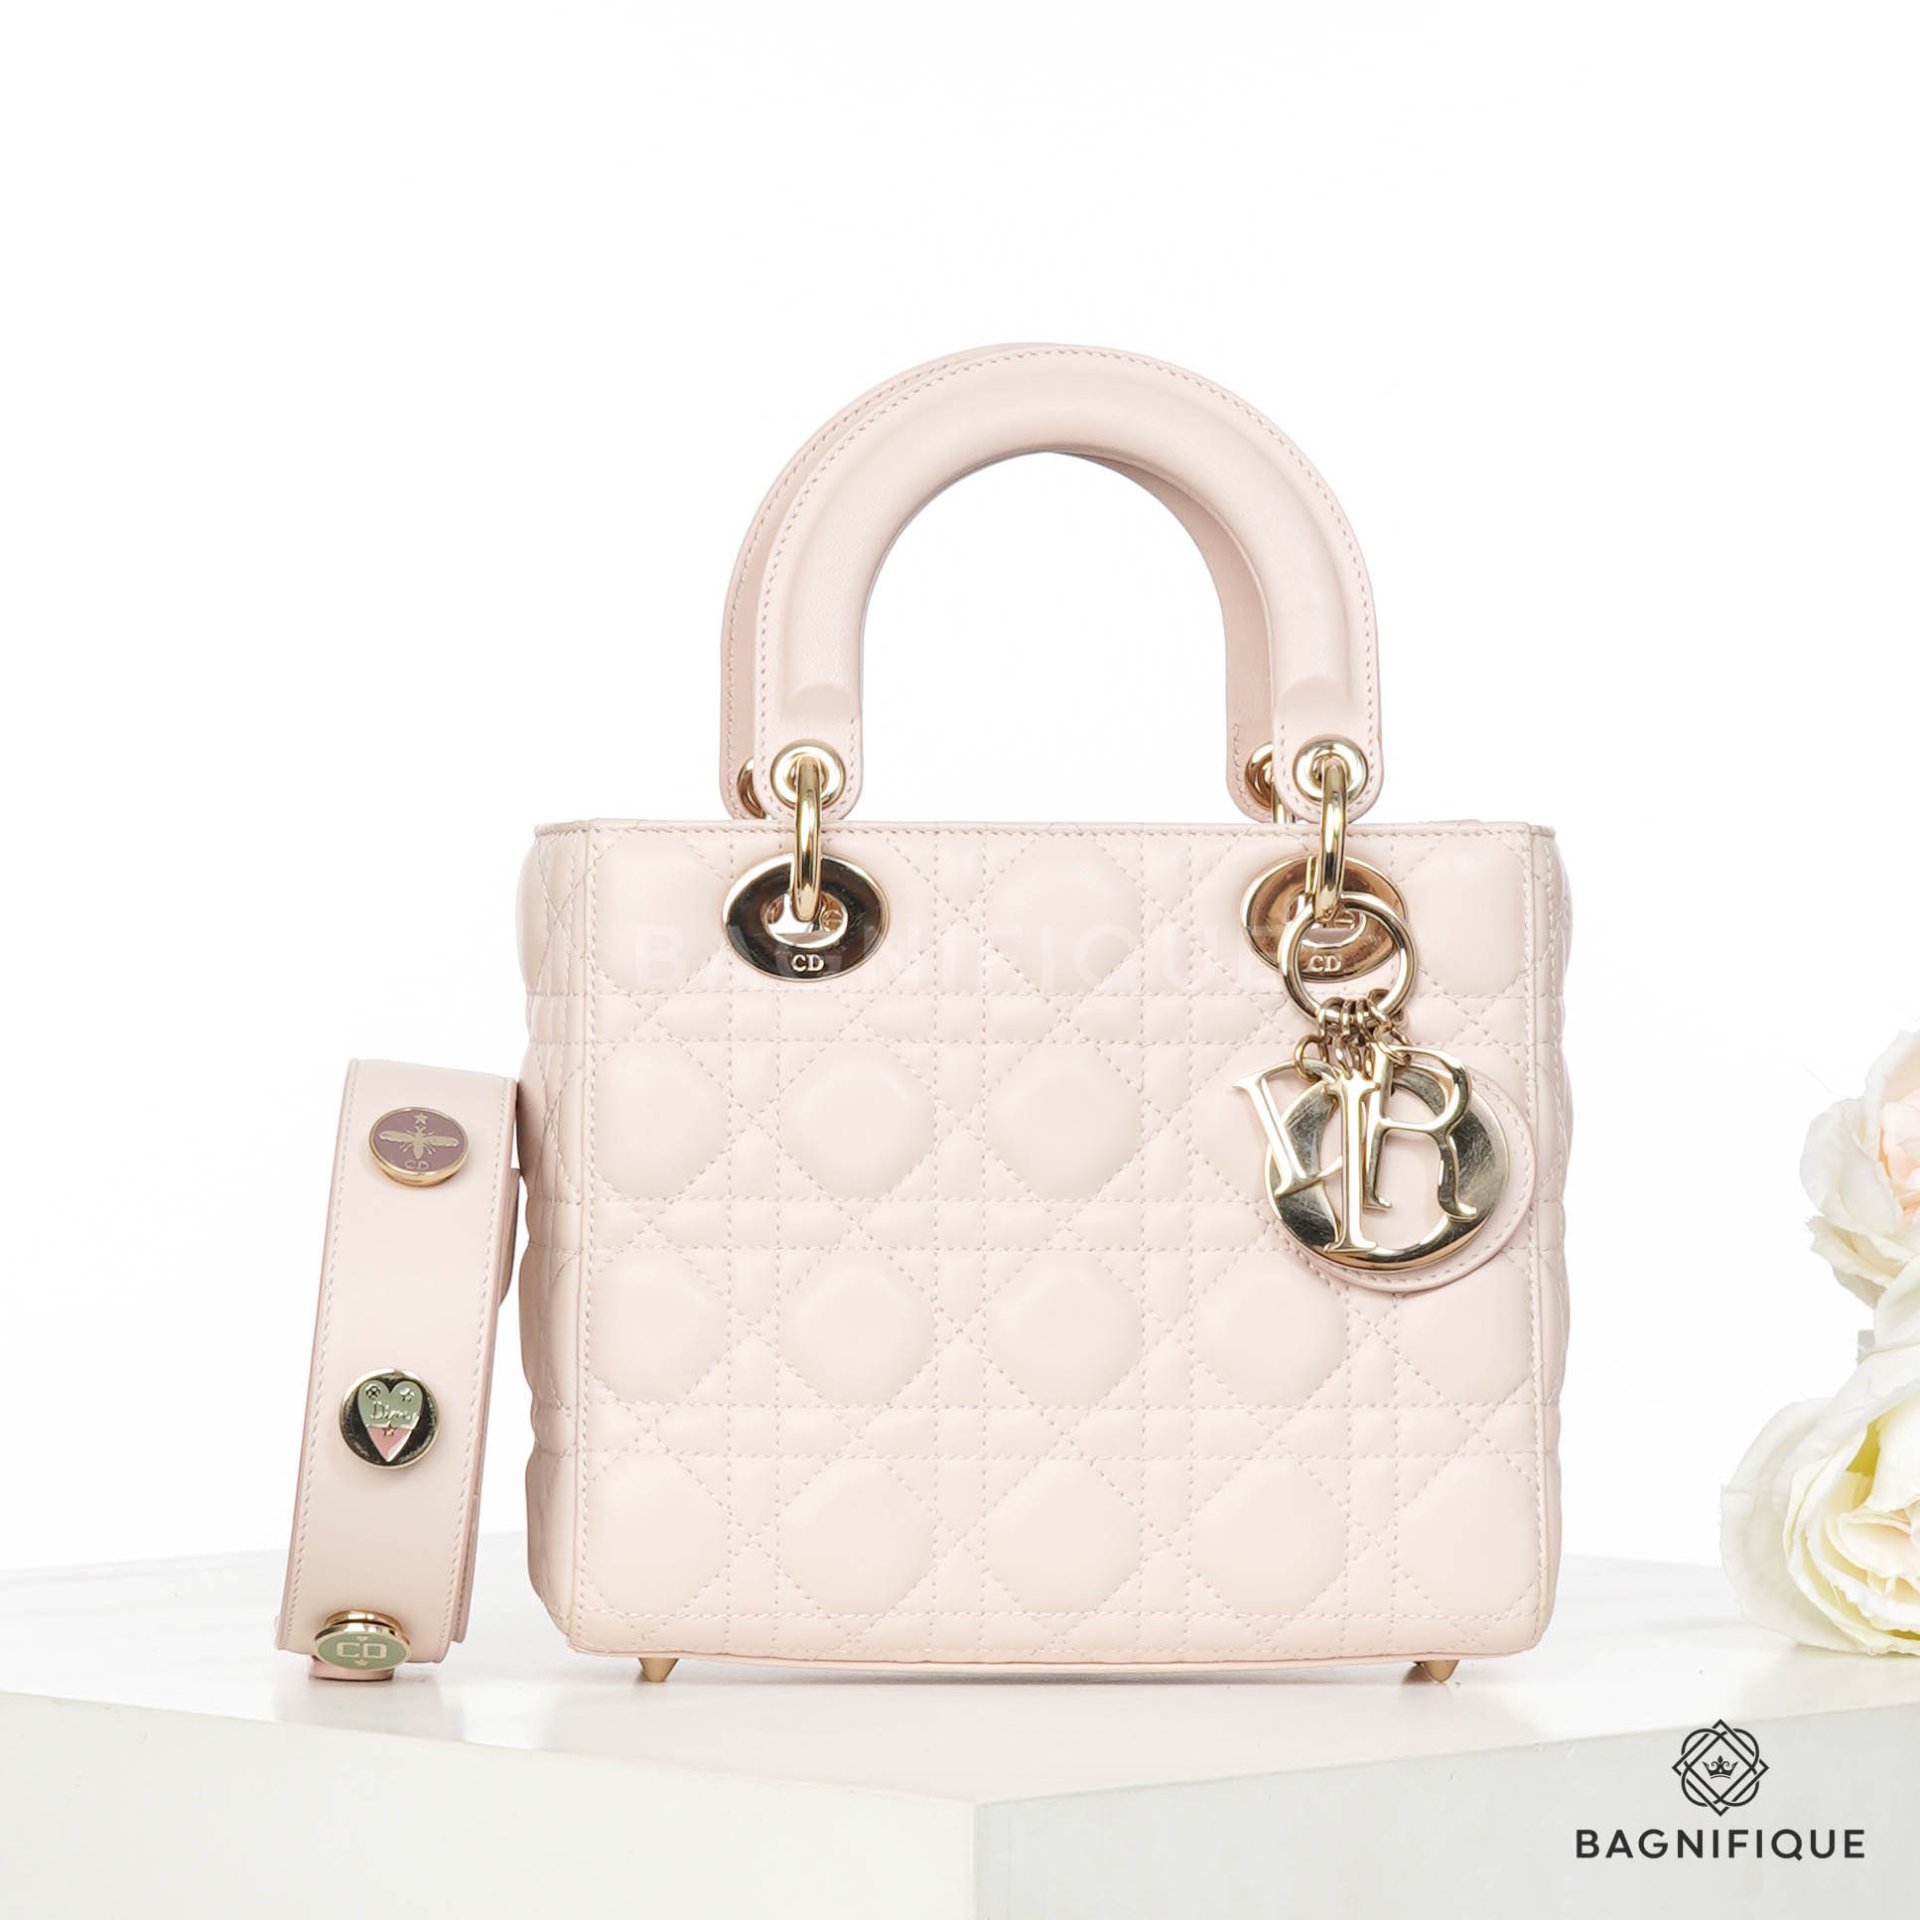 What you need to know before buying the Lady Dior  SACLÀB